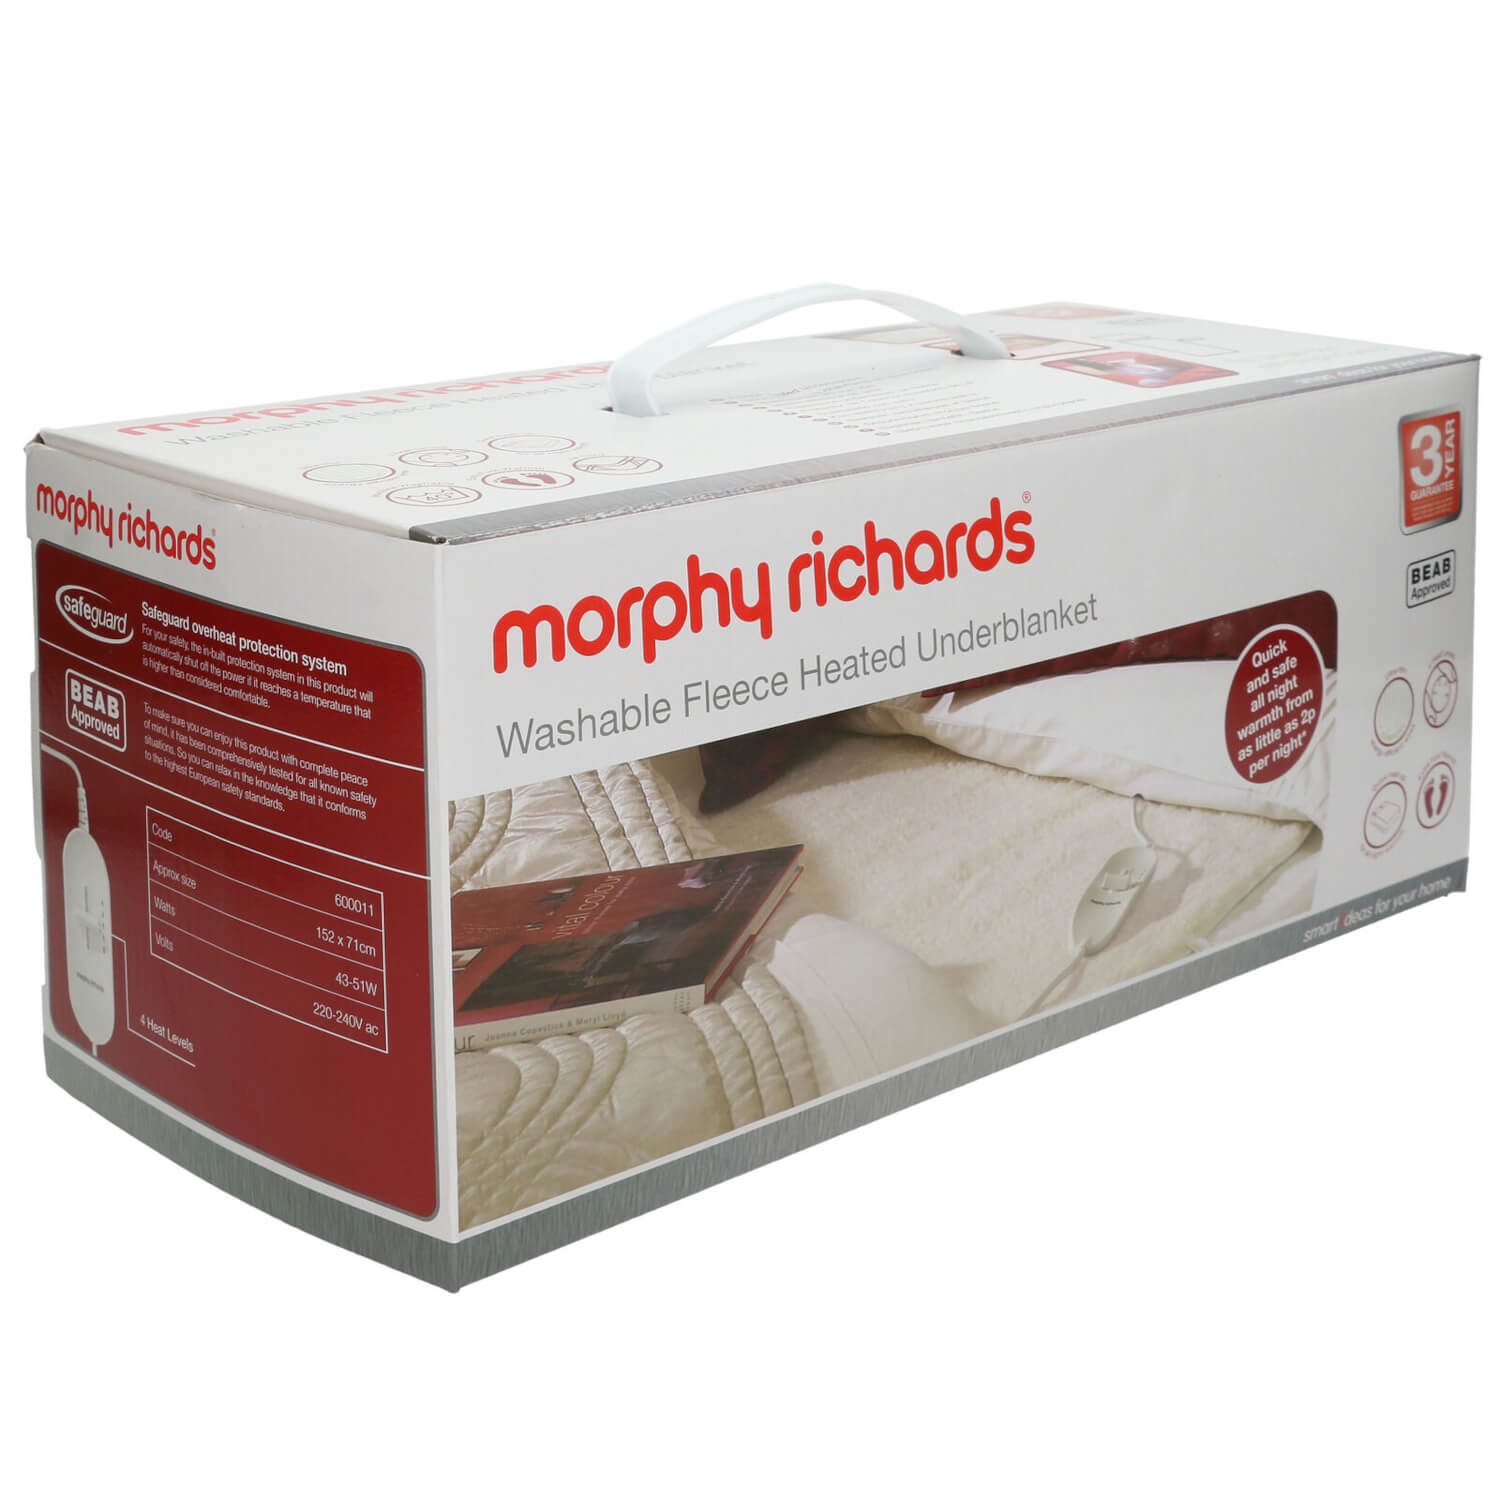 Morphy Richards Dual Control Washable Fleece Heated Underblanket – King Size | 600014 1 Shaws Department Stores